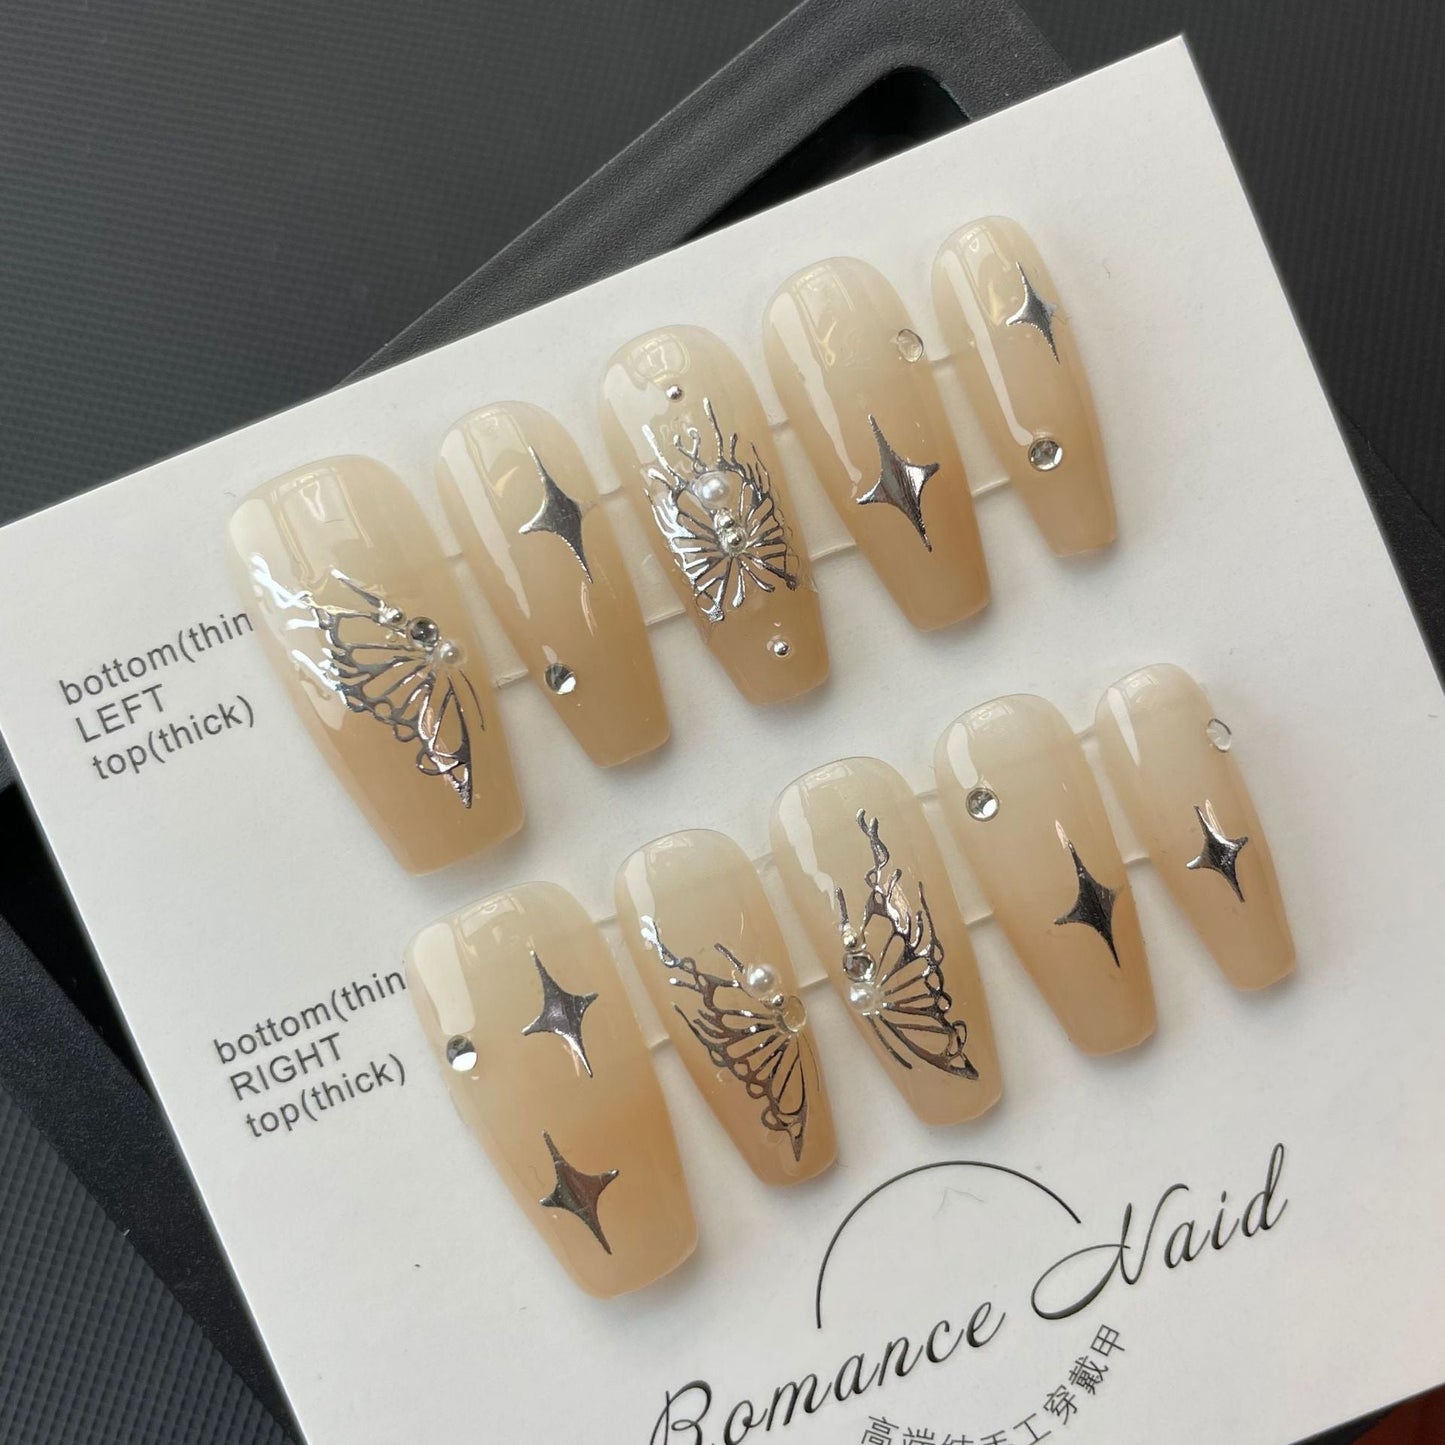 692 butterfly style press on nails 100% handmade false nails nude color